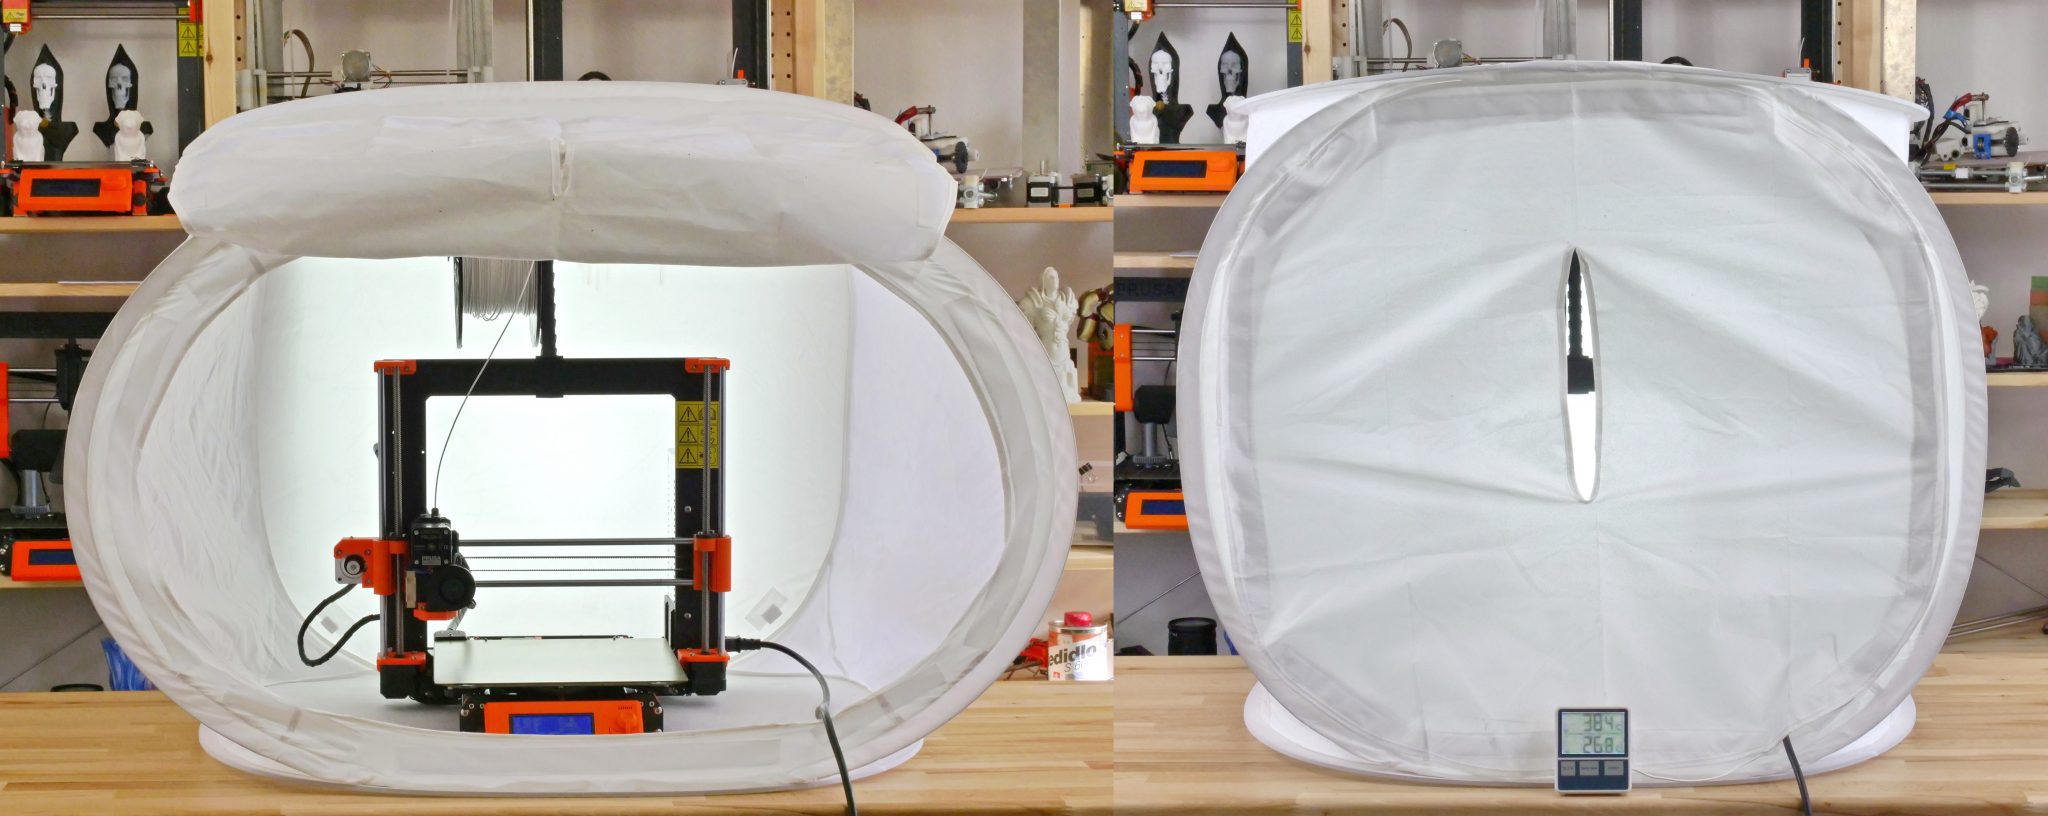 How To Build A Simple Cheap Enclosure For Your 3d Printer Prusa